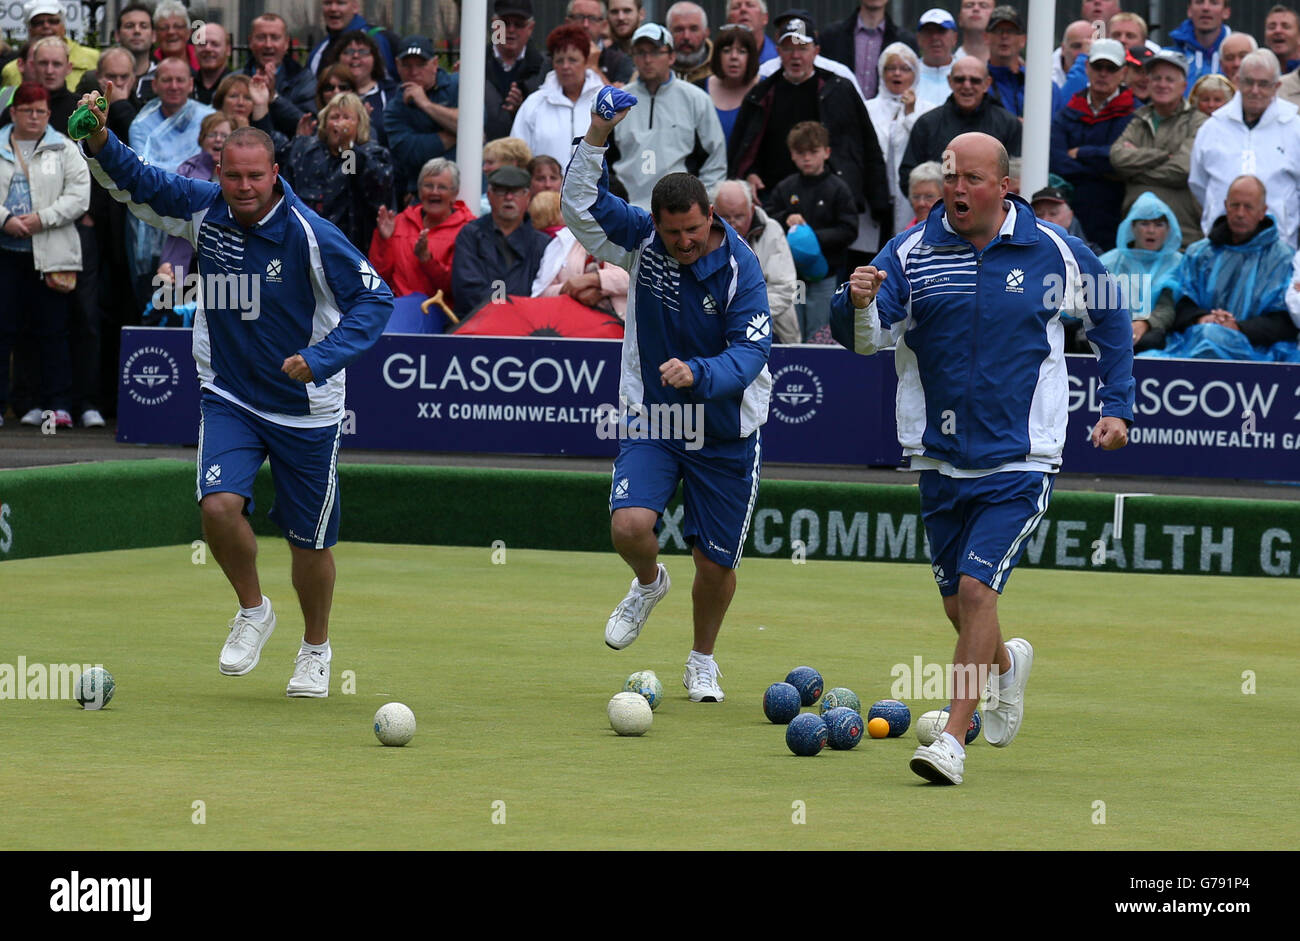 Scotland's (left-right) Paul Foster, Neil Speirs and David Peacock celebrate a shot in their Semi-final Men's Fours match against Australia at Kelvingrove Lawn Bowls Centre, during the 2014 Commonwealth Games in Glasgow. Stock Photo